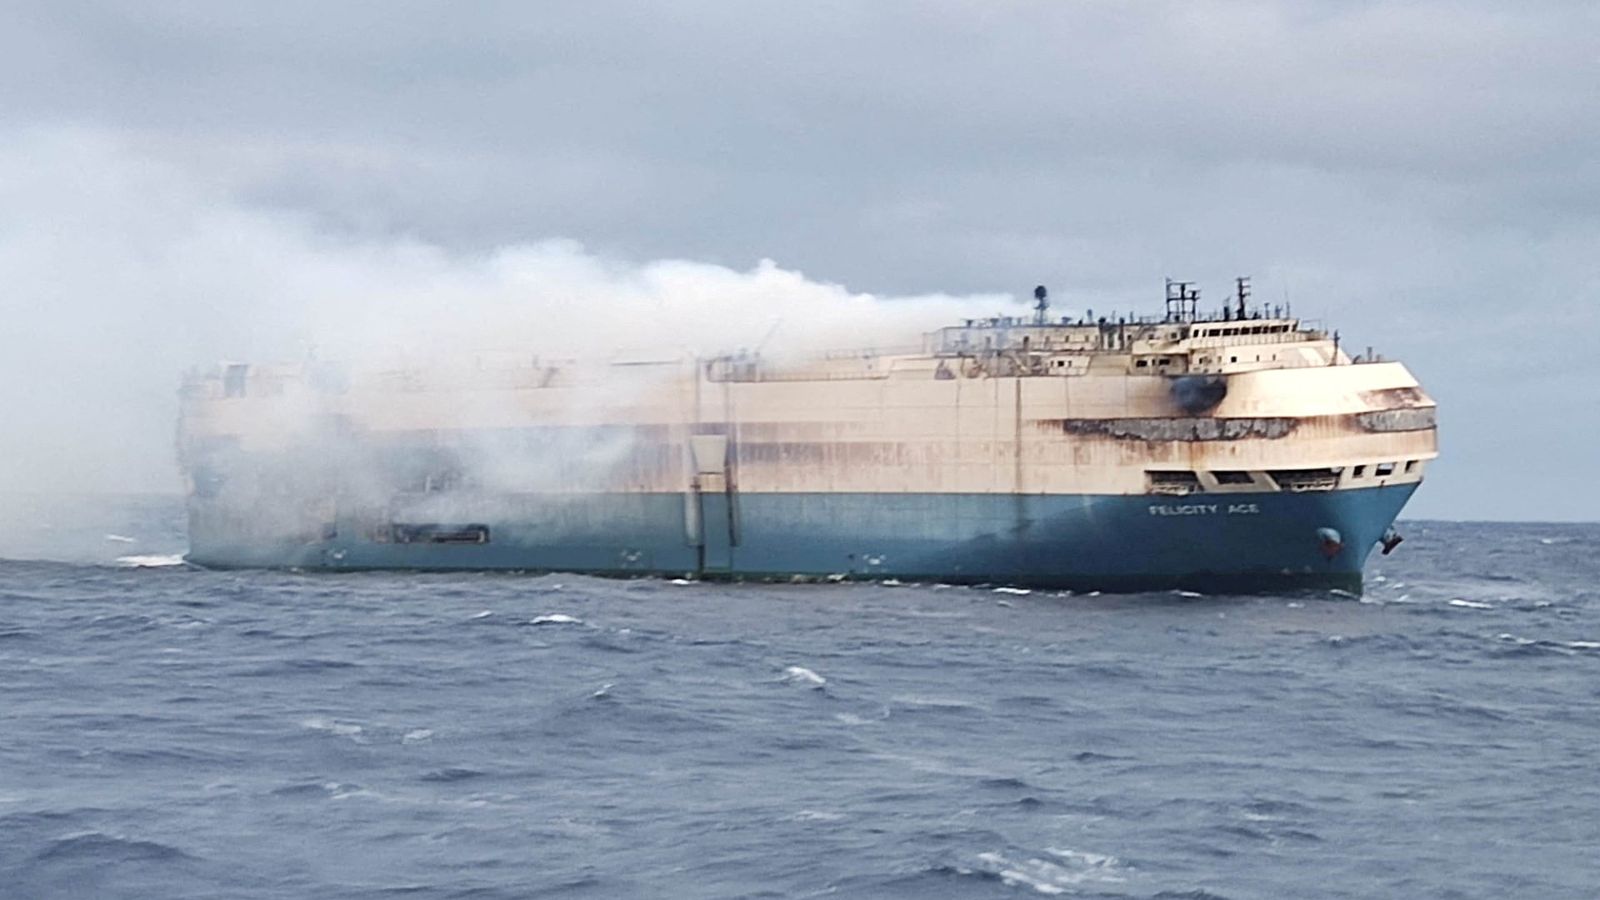 A cargo ship carrying thousands of luxury cars sinks after catching